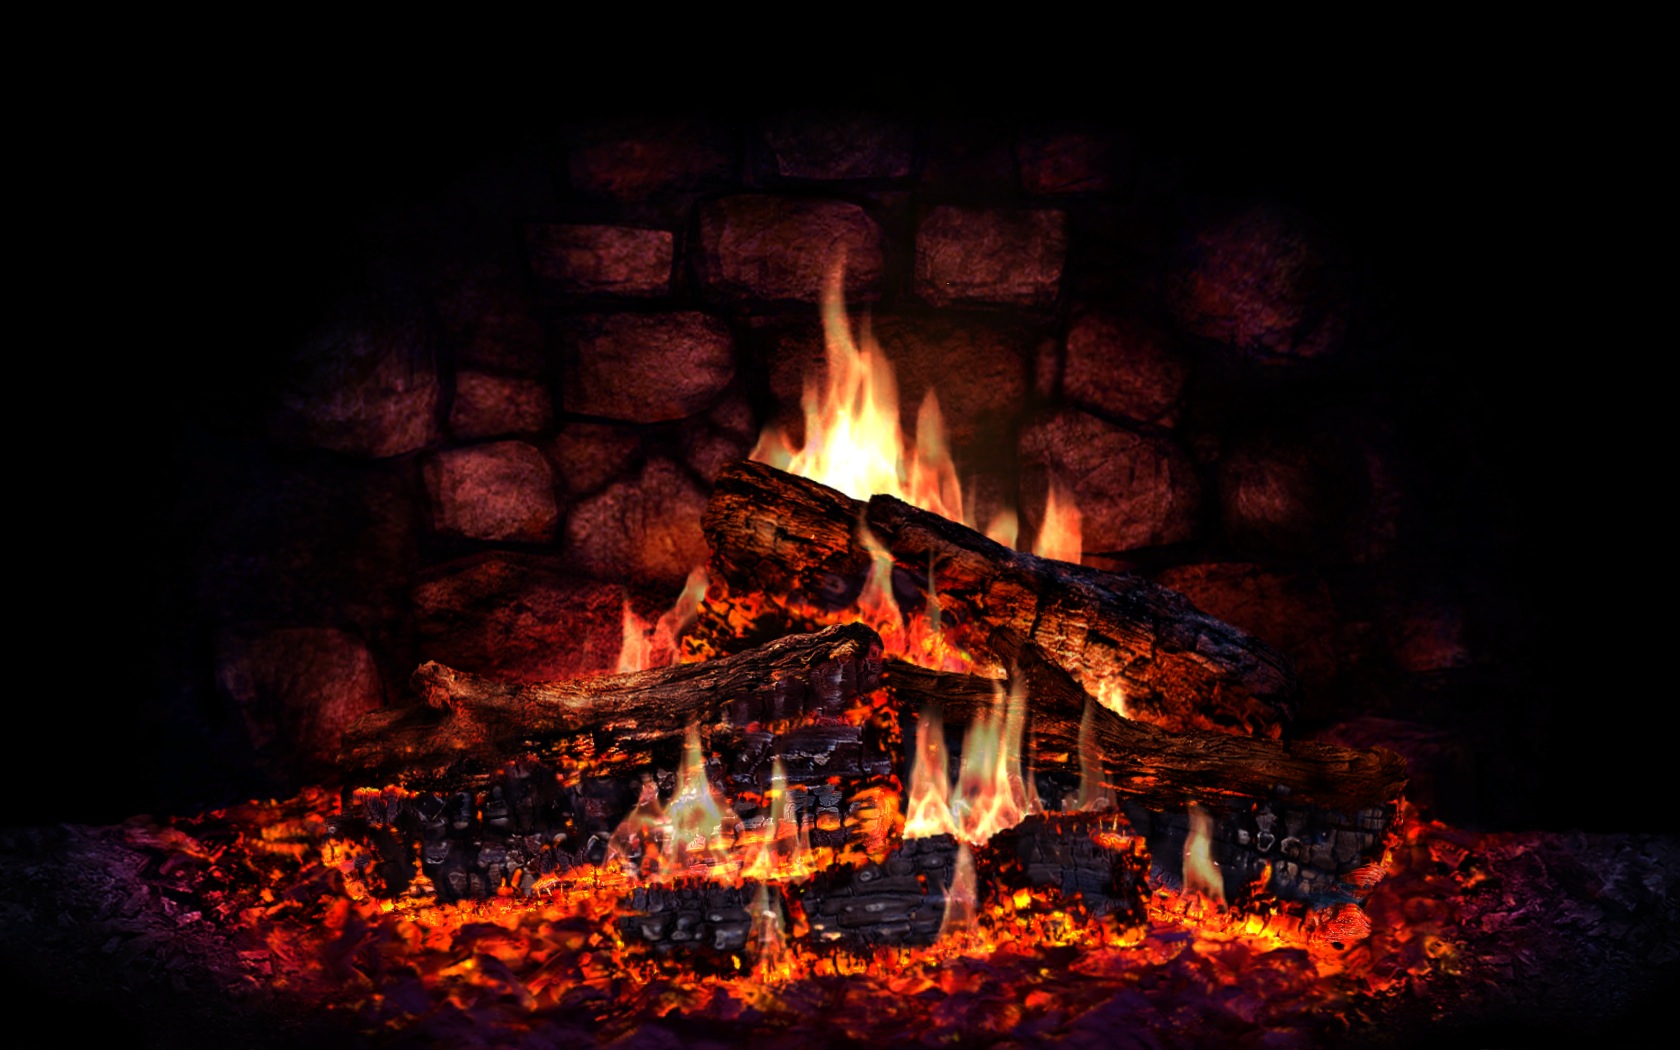 Animated Fireplace Screensaver With Sounds Car Tuning